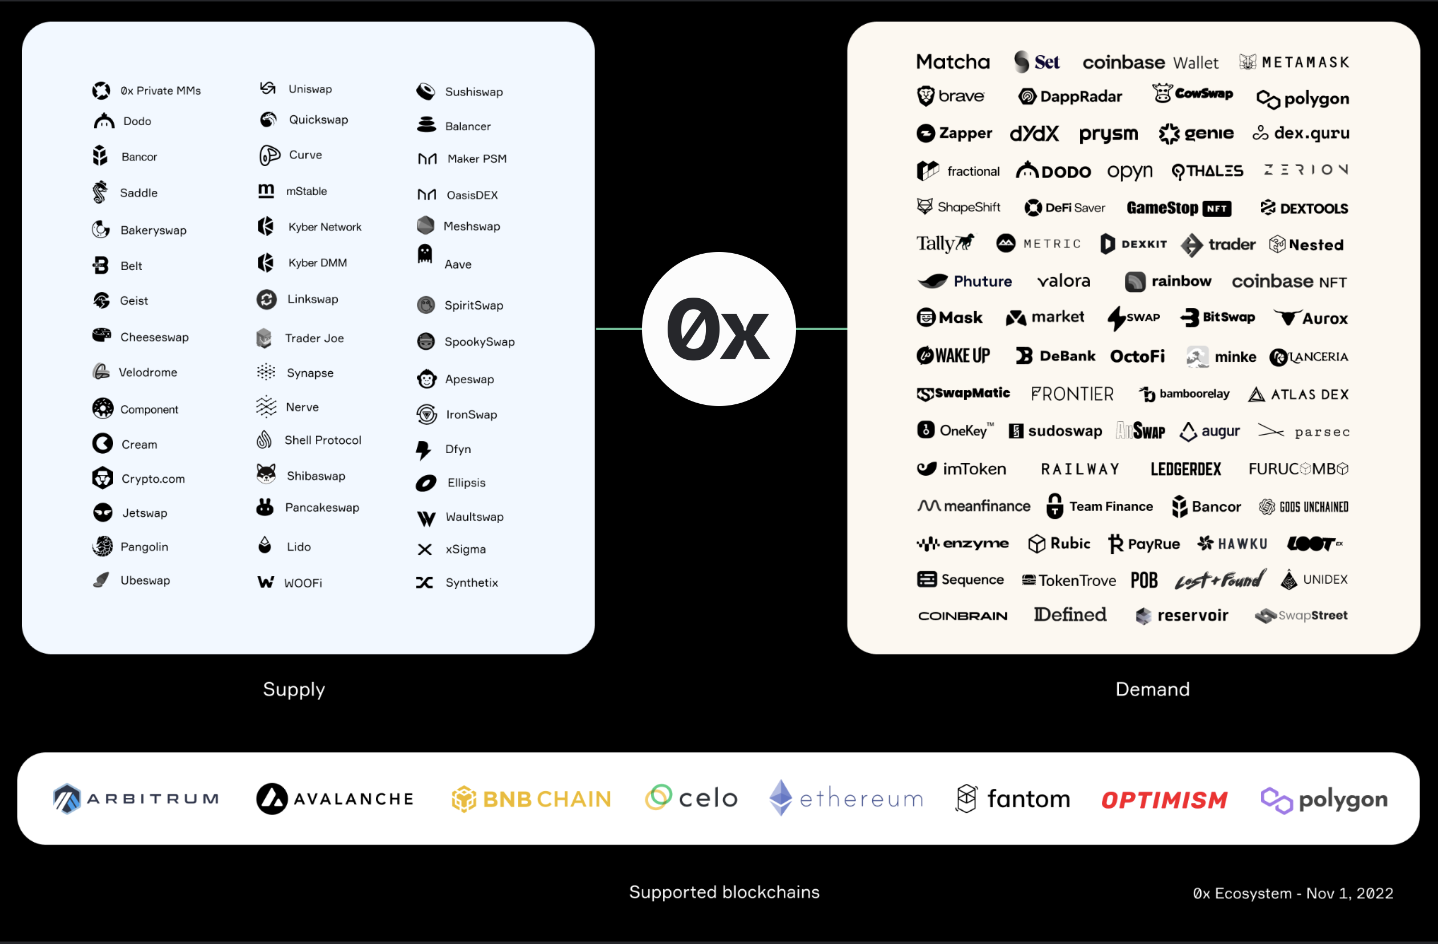 0x is an open-source, decentralized exchange infrastructure that enables the exchange of tokenized assets on multiple blockchains.